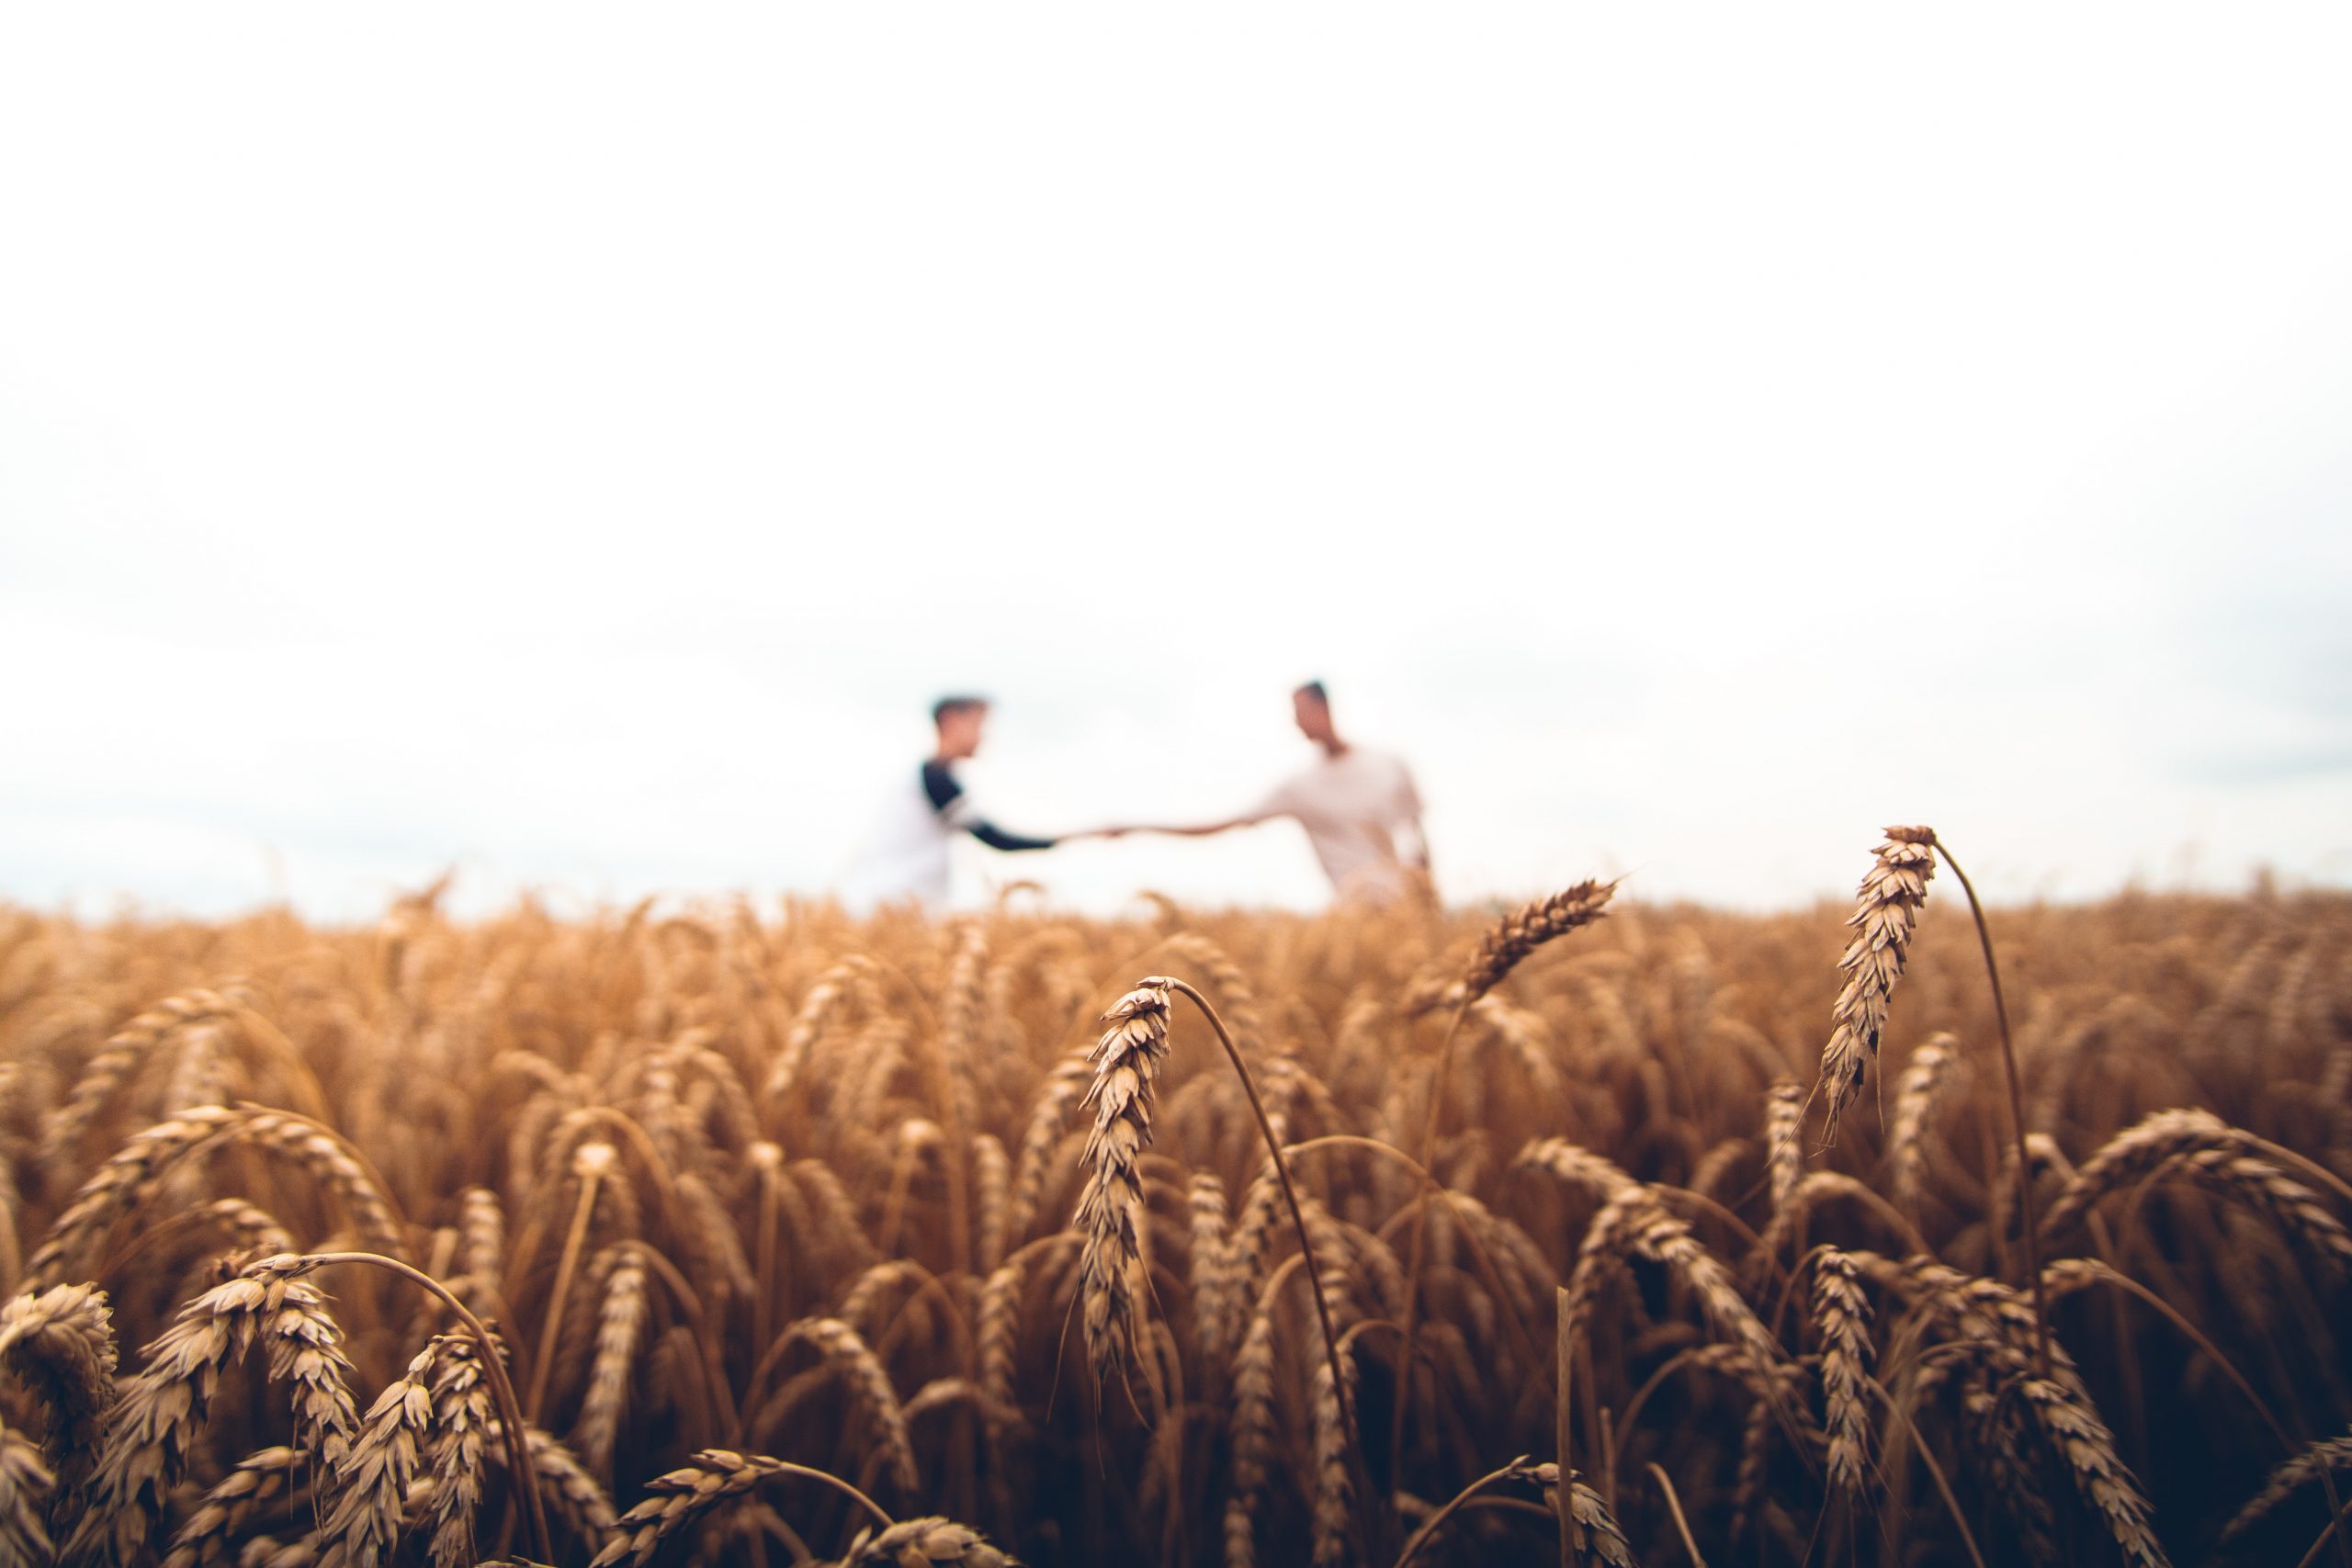 Two farmers shaking hands in a field of crops